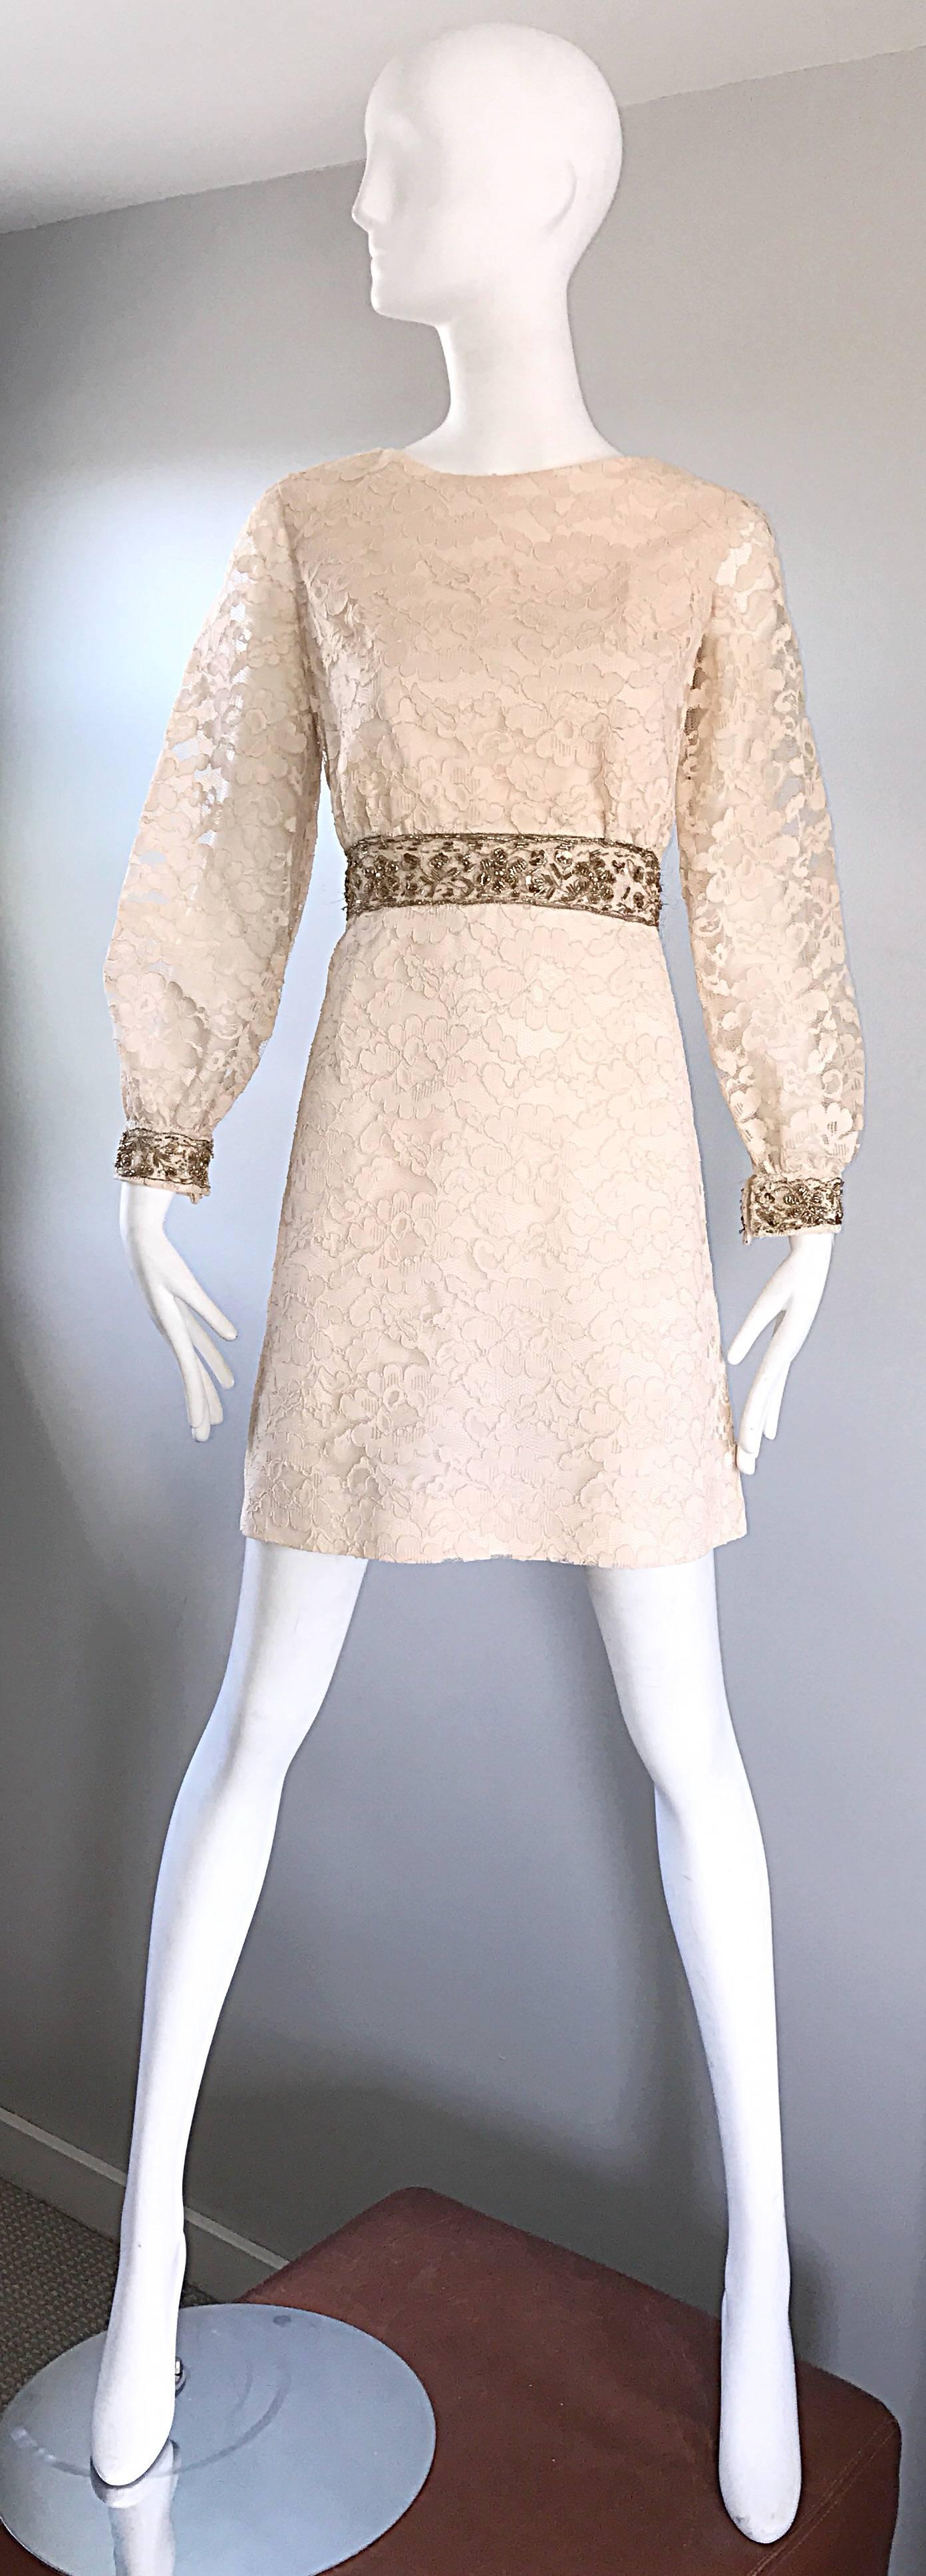 Chic 1960s ivory and gold lace A-line dress! Features a fitted bodice, with a nice full flattering flared skirt. Gold embroidered waistband and sleeve cuffs are adorned with gold sequins, pearls and beads. Nice full sleeves with a fitted cuff that